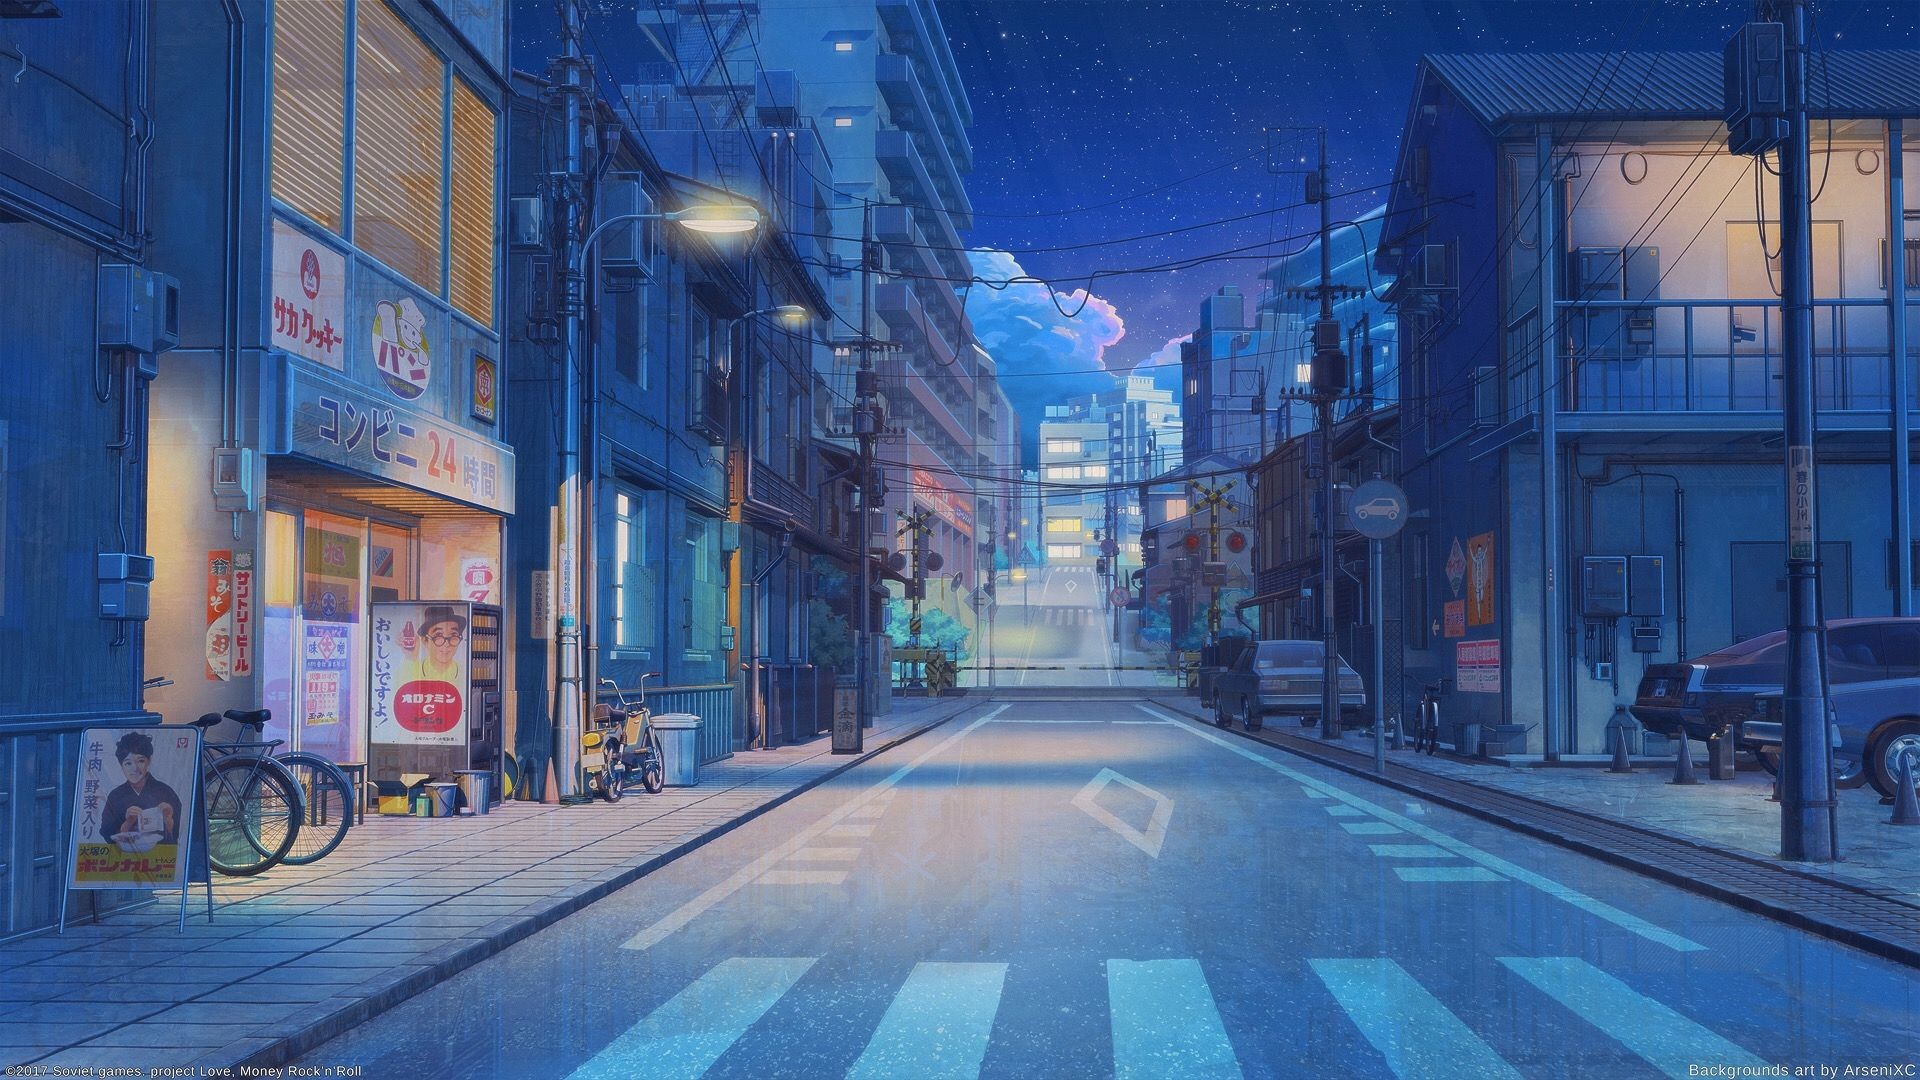 Anime Aesthetic Wallpaper 101 images in Collection Page 3